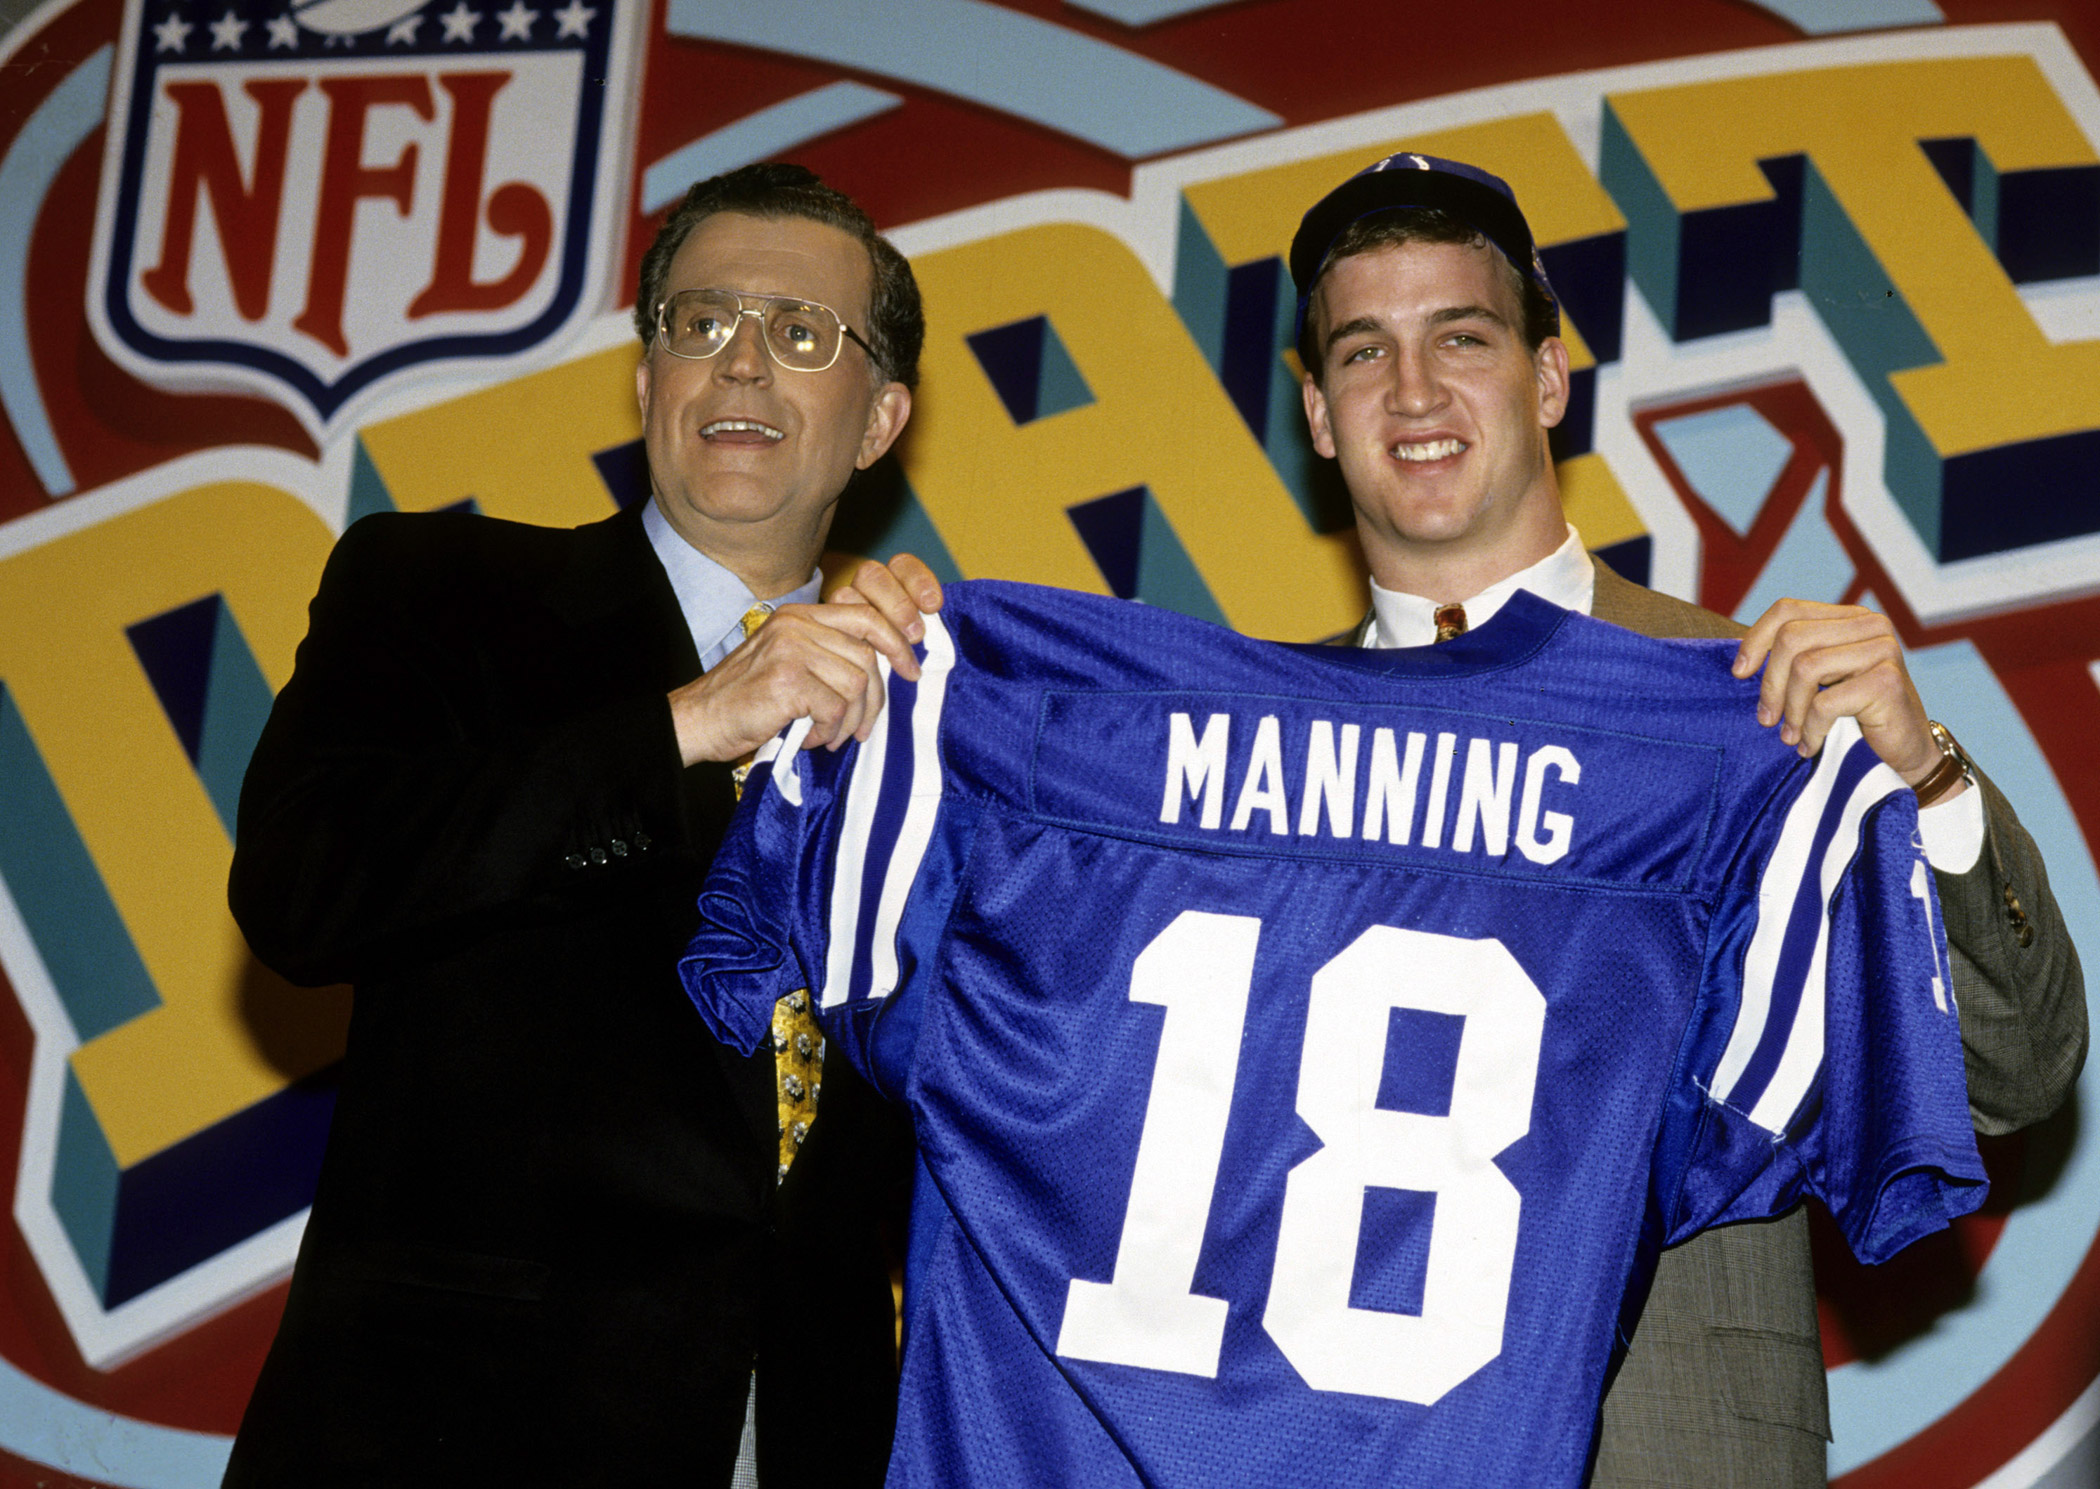 Peyton Manning was selected as the first overall draft pick by the Indianapolis Colts on April 18, 1998. He is introduced by NFL Commissioner Paul Tagliabue at the 1998 NFL Draft in New York.